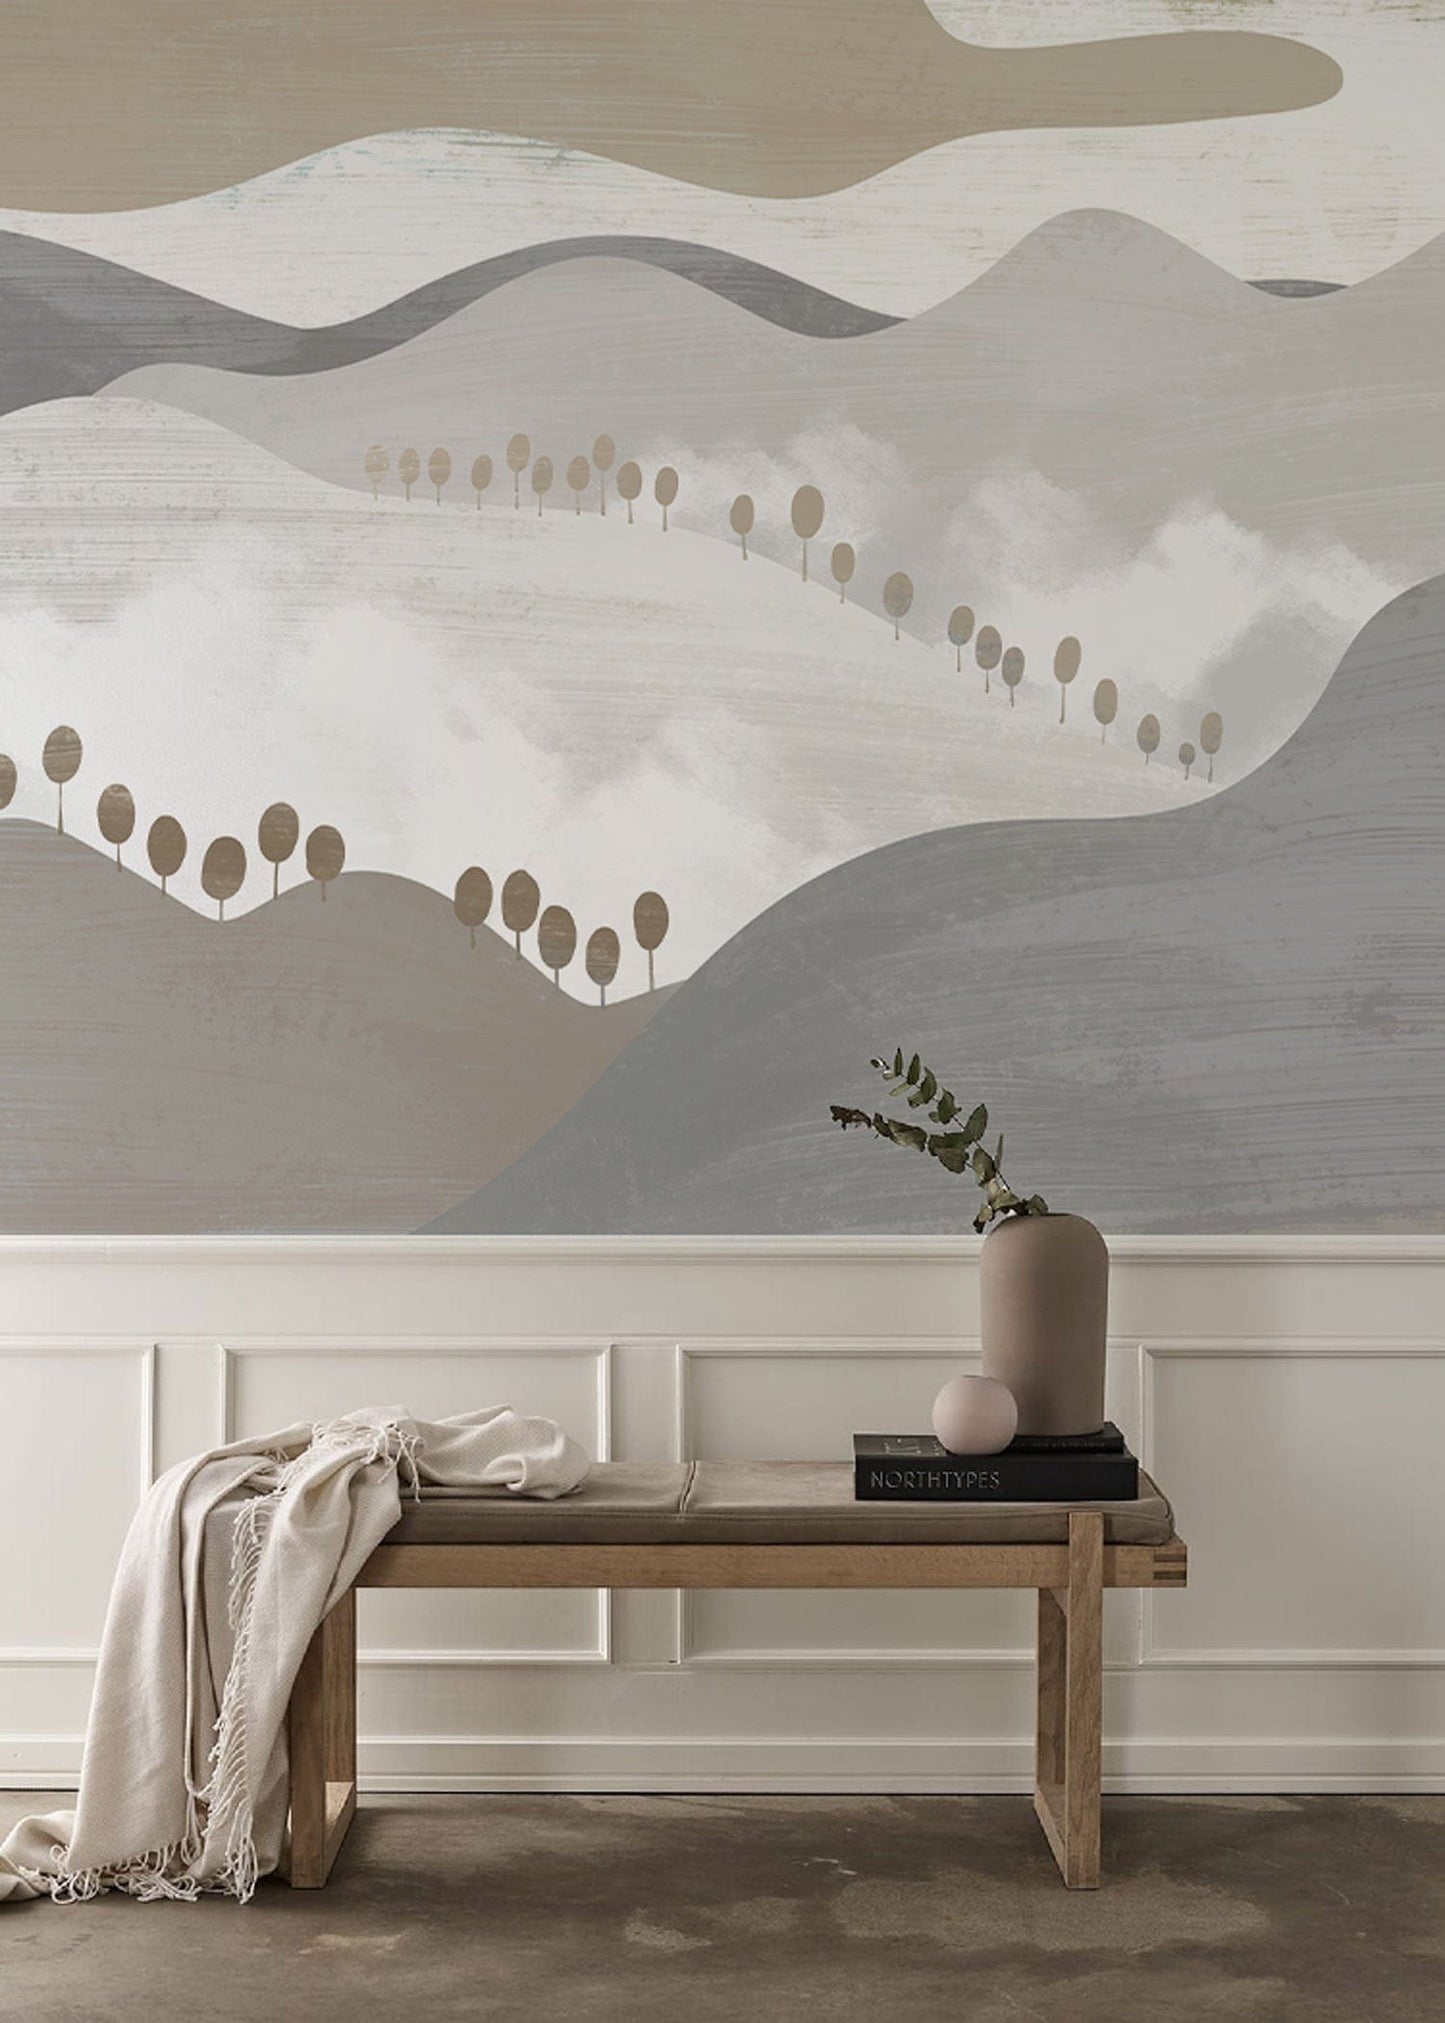 The hallway will be decorated with a wallpaper mural that features a panorama of grey mountains and waves.